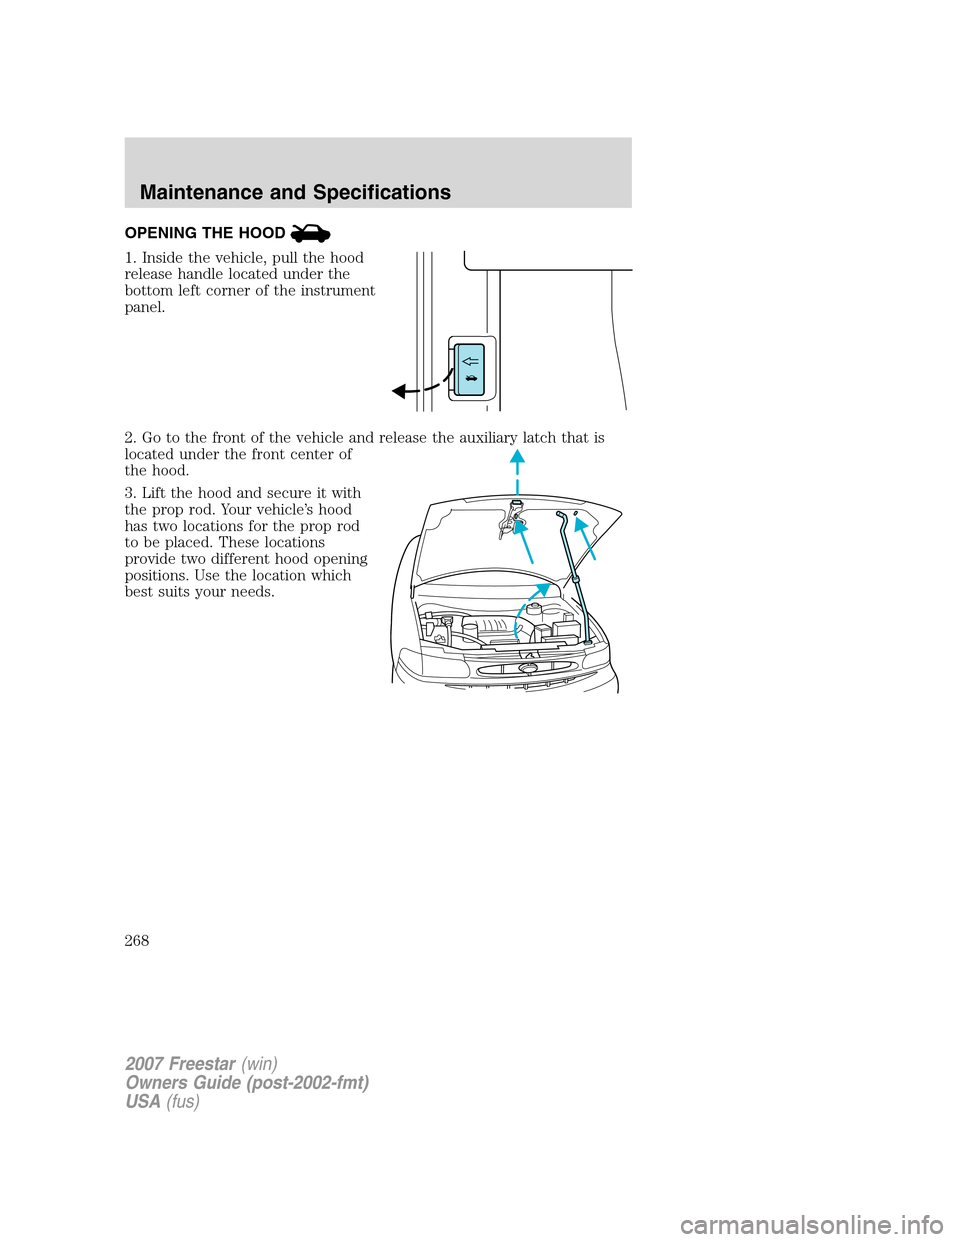 FORD FREESTAR 2007 1.G Owners Manual OPENING THE HOOD
1. Inside the vehicle, pull the hood
release handle located under the
bottom left corner of the instrument
panel.
2. Go to the front of the vehicle and release the auxiliary latch tha